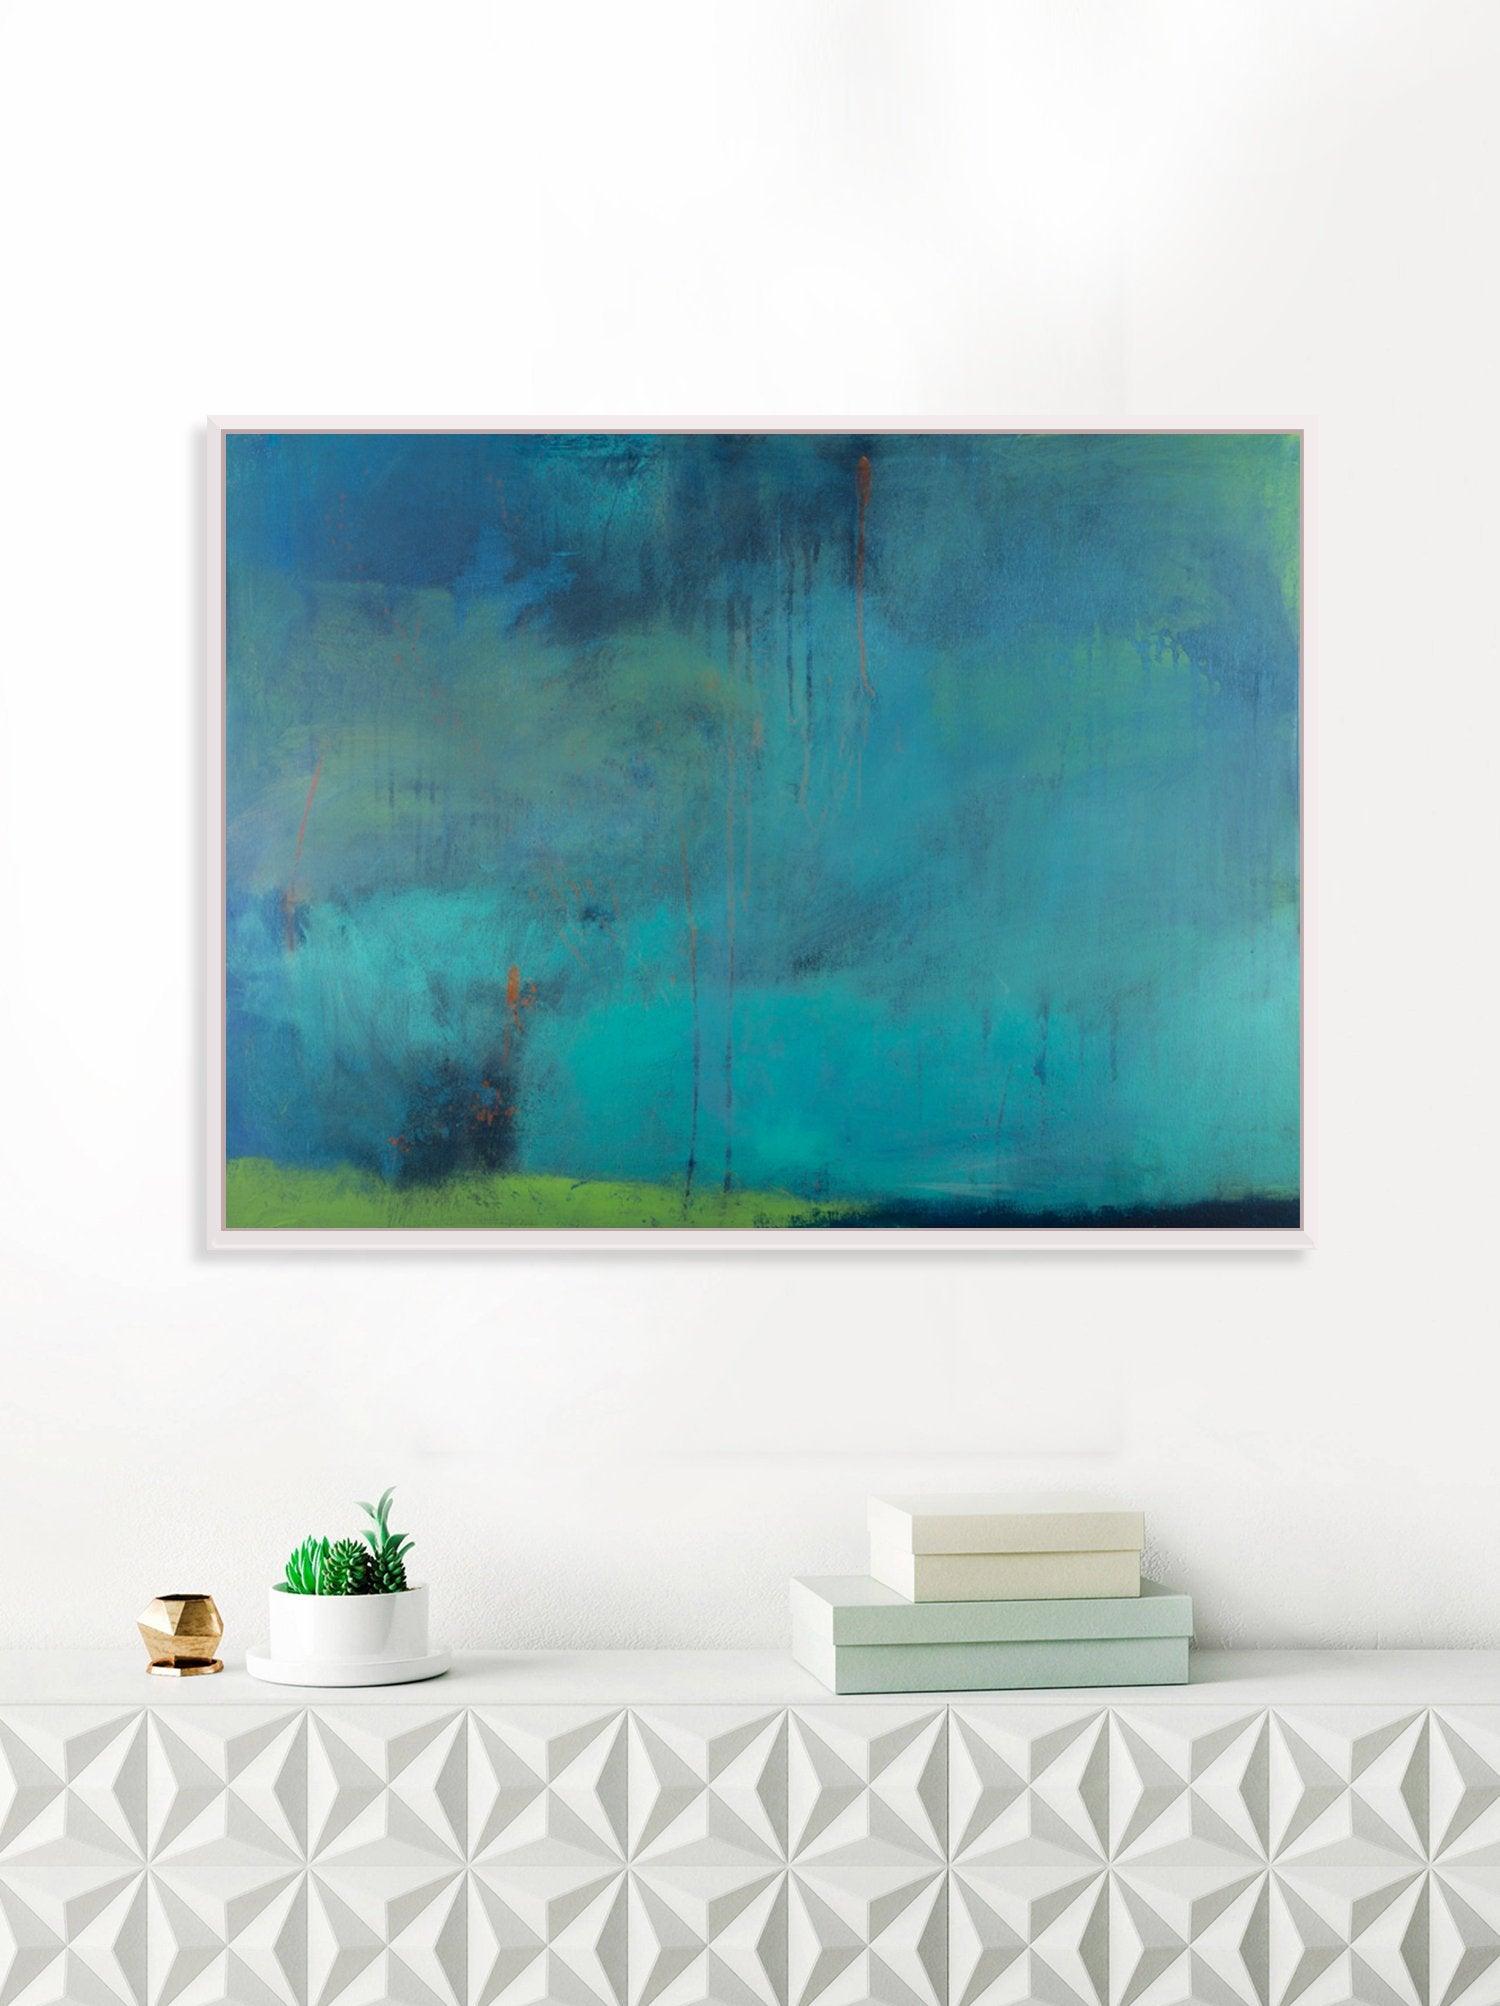 Teal wall art abstract painting, large wall art, gallery wall, wall art canvas, green abstract, Landscape painting by Camilo Mattis - camilomattis.com